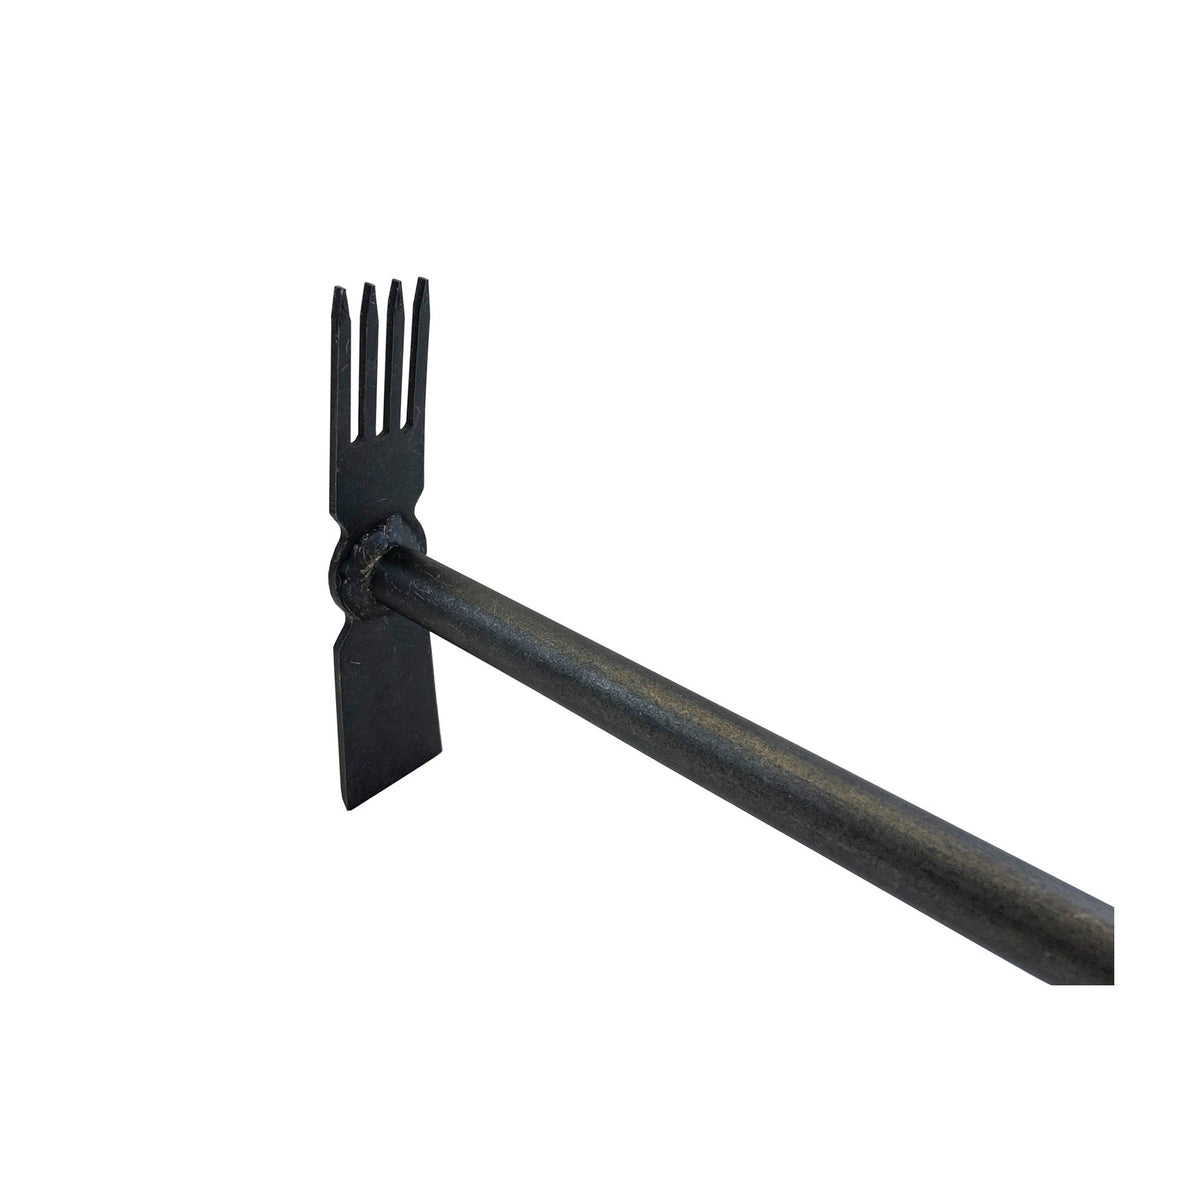 DeWit Comby Hoe - 4 Tine Cultivator /  Straight Edge Long Handle